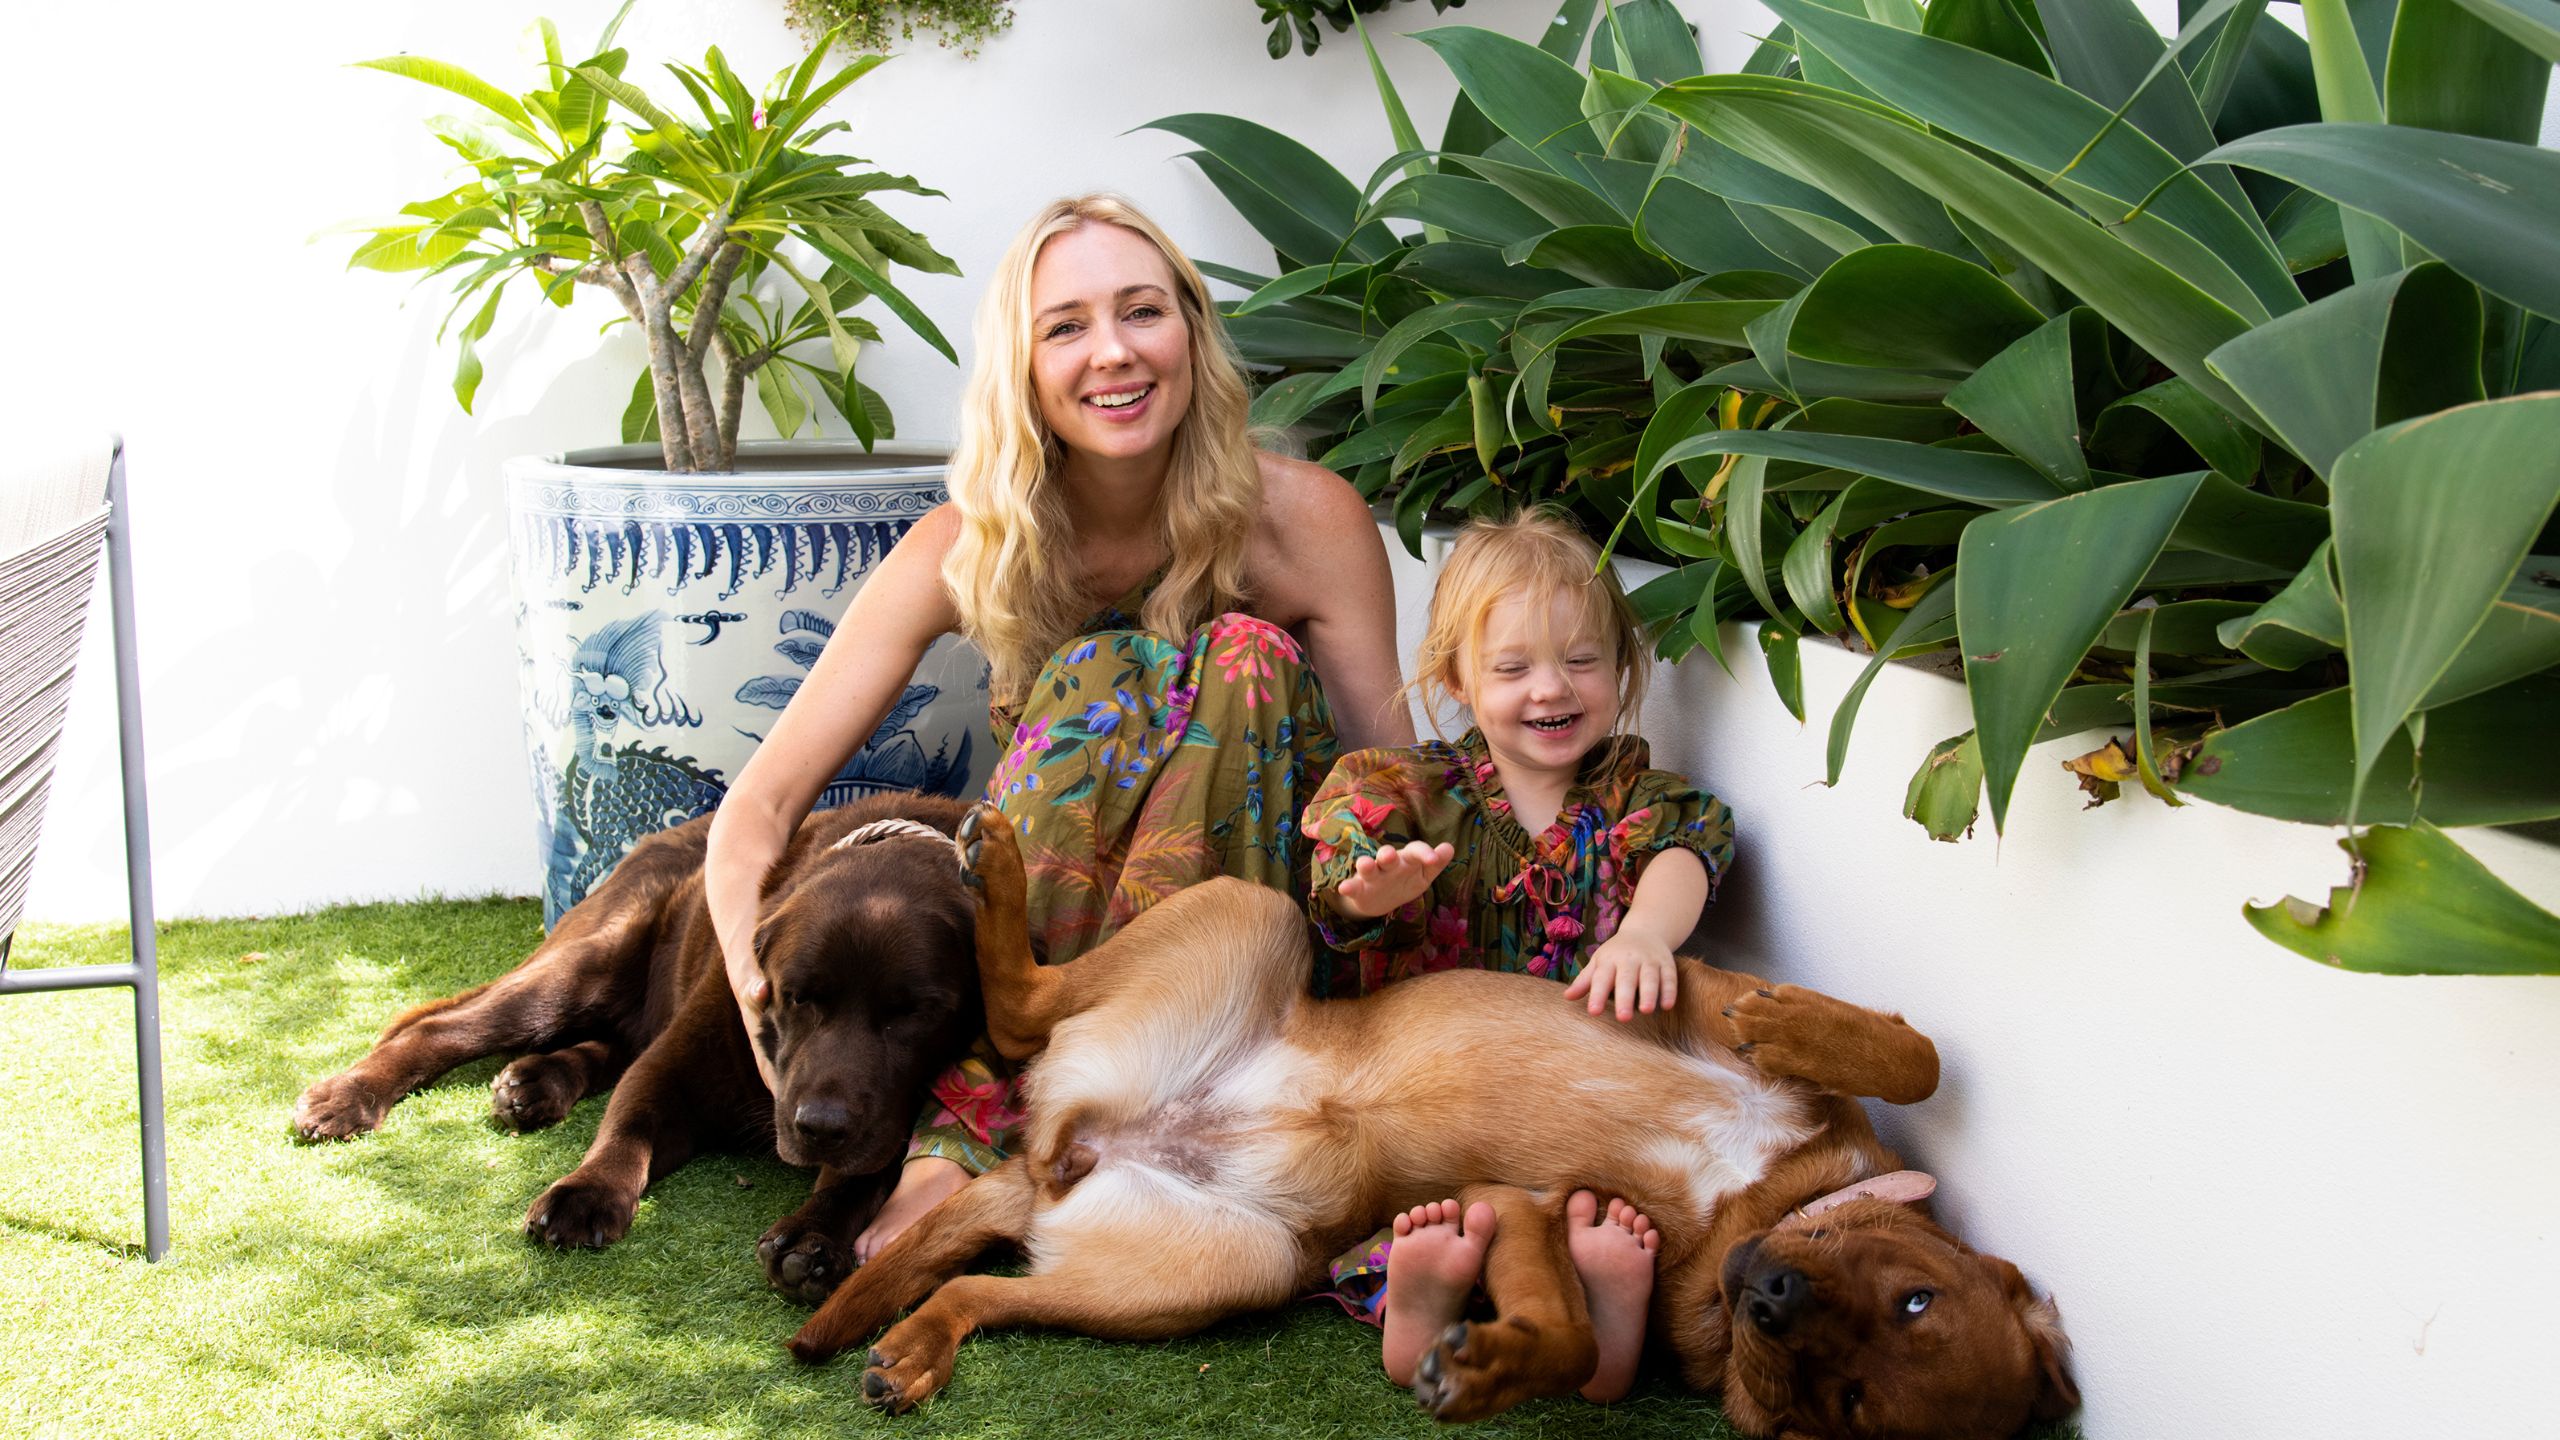 Canna with her daughter and dogs. (Source: supplied)